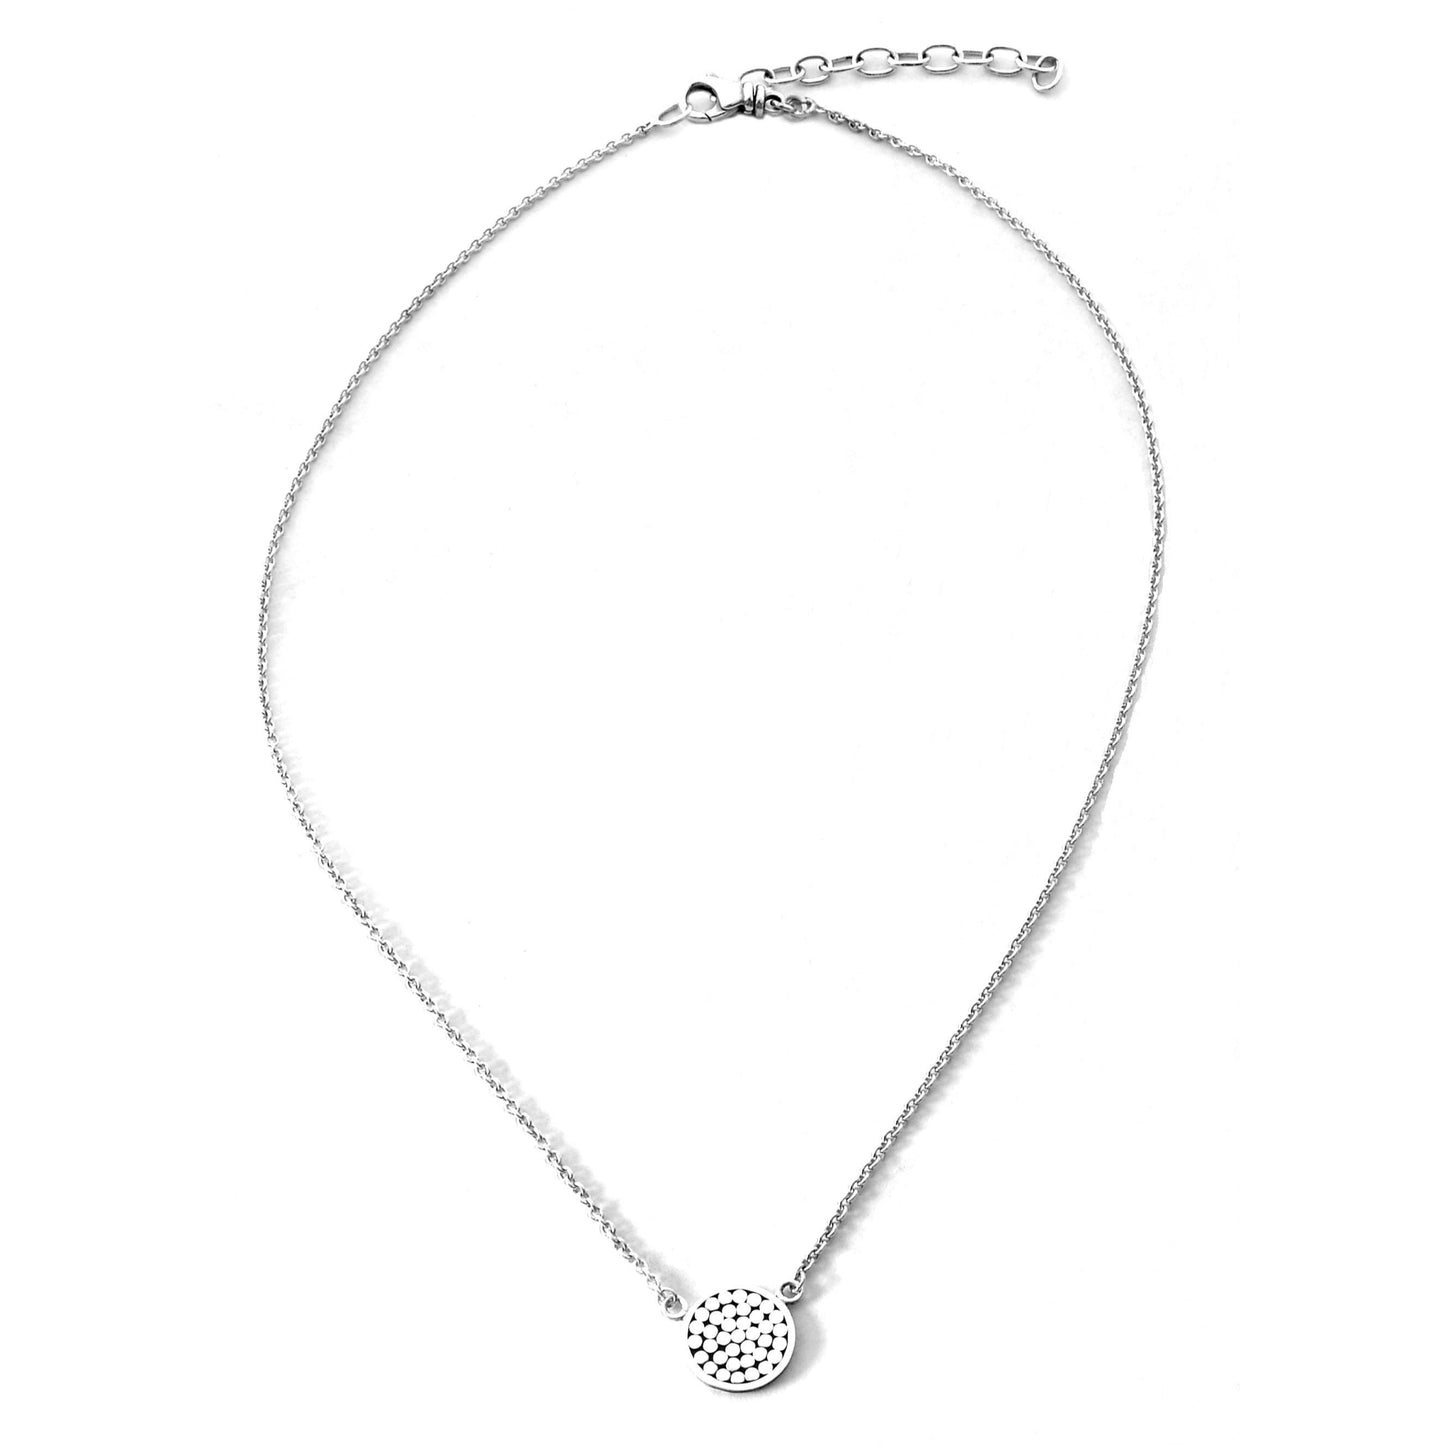 N840 SOHO .925 Sterling Silver Single Station Necklace 16-18.